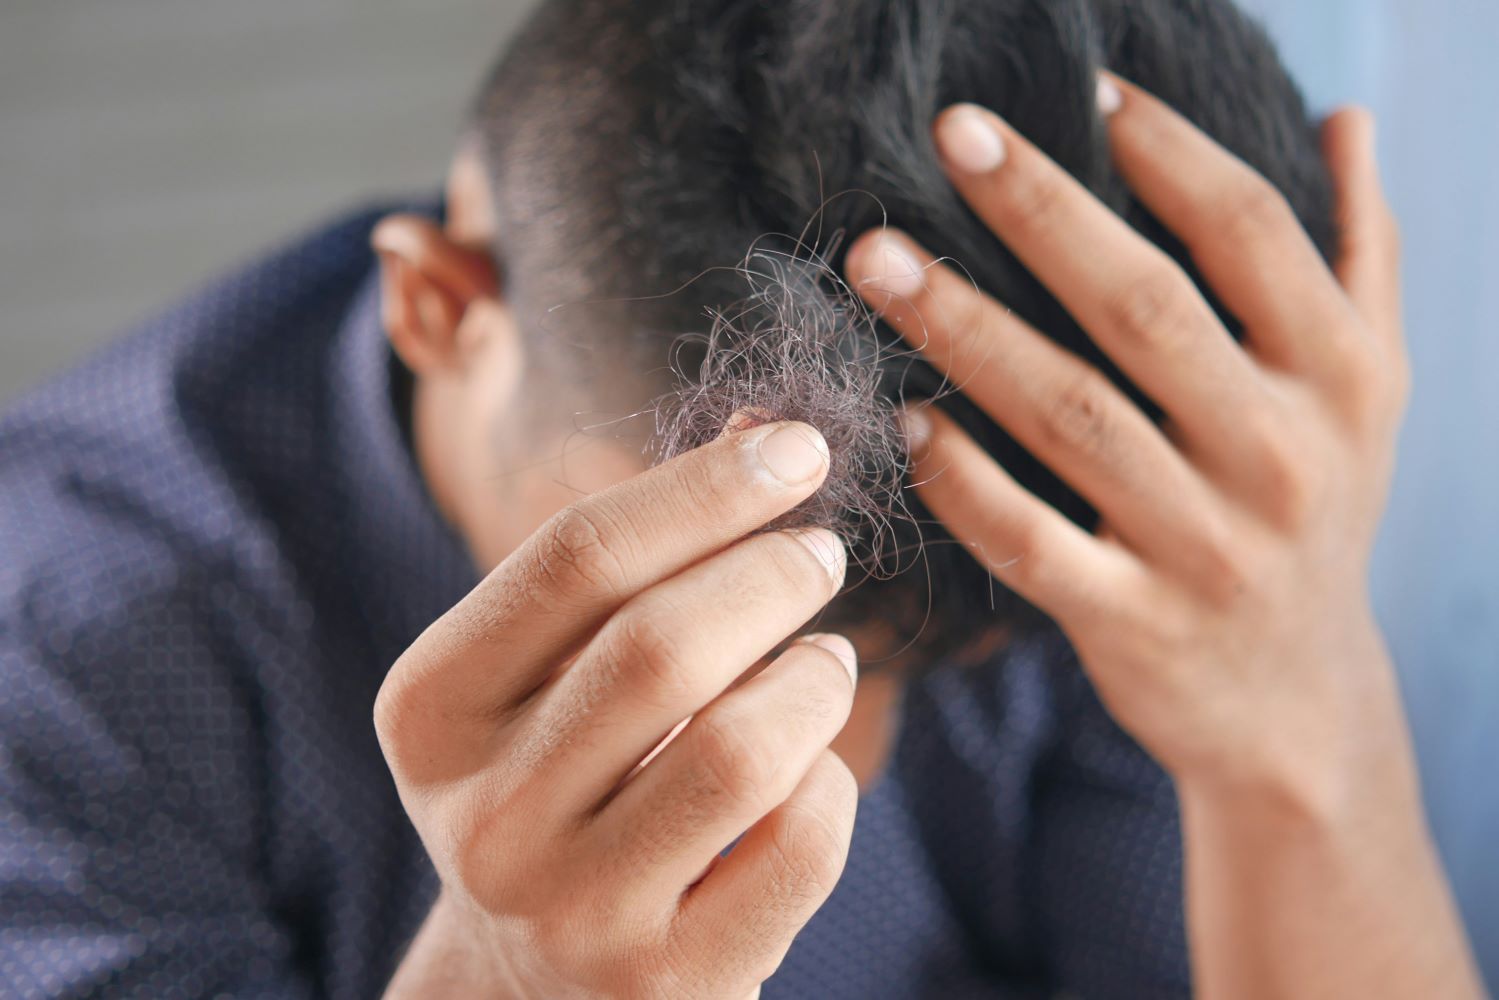 Why am I still going bald on Finasteride?